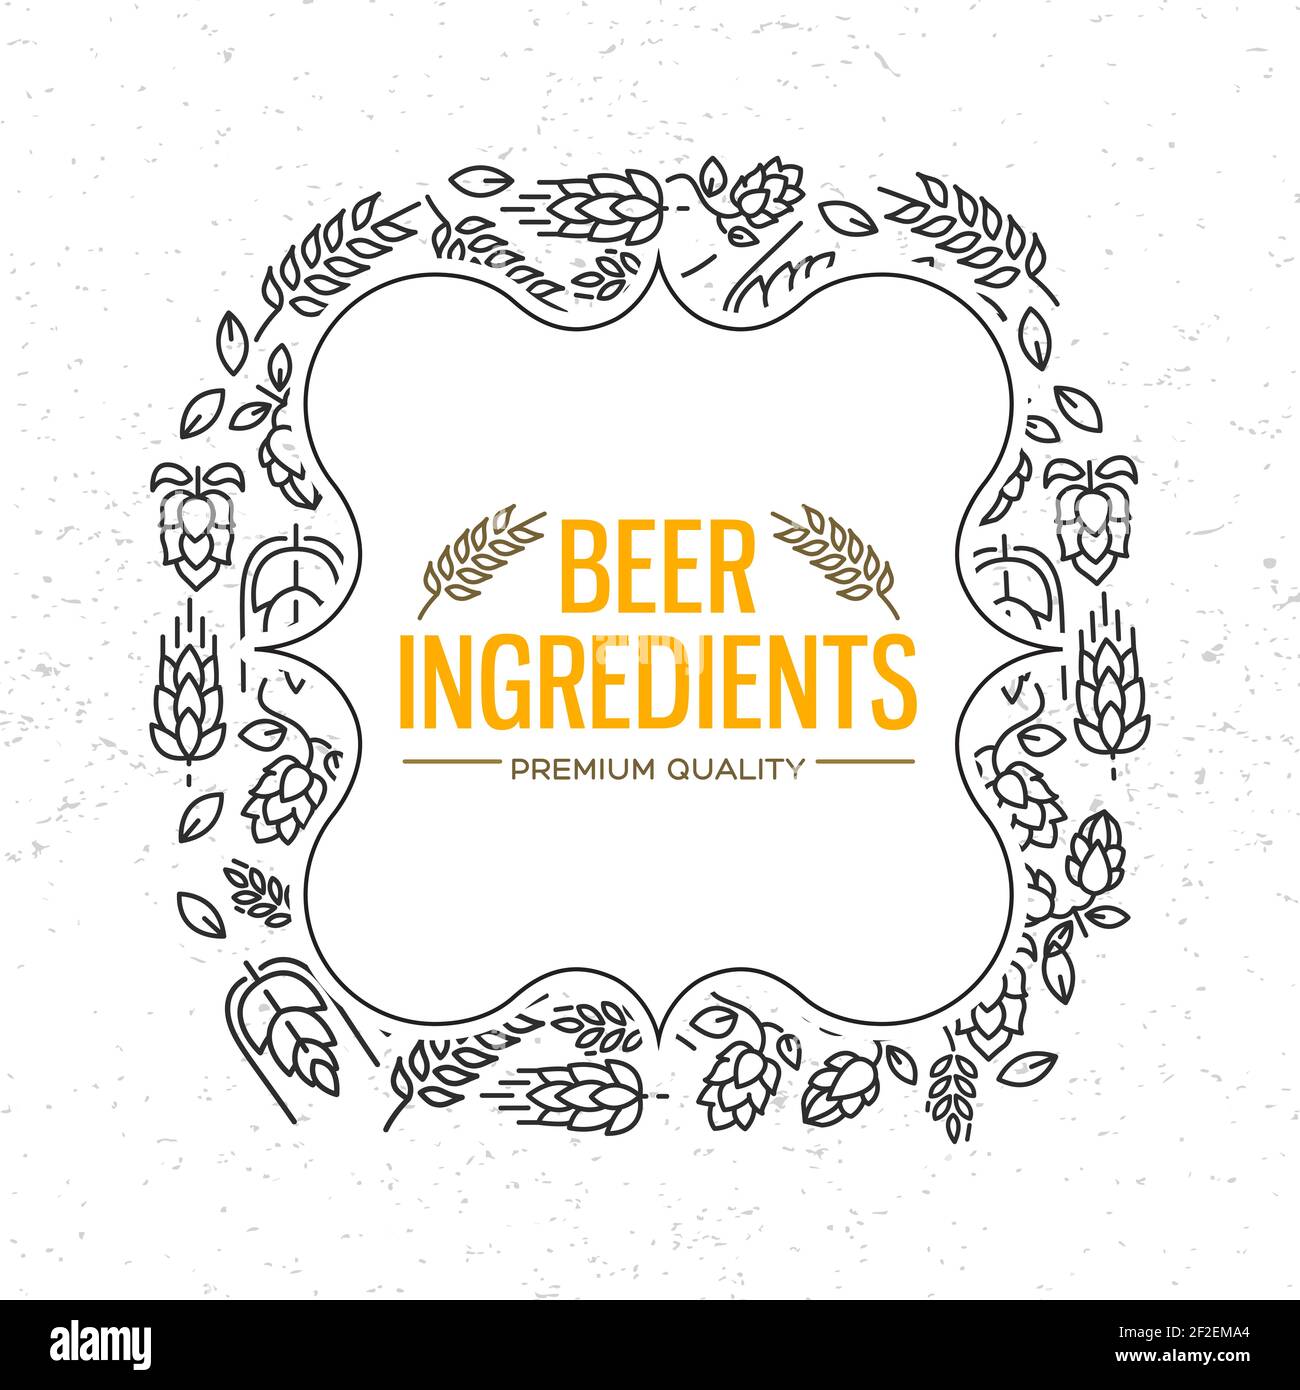 Stylish design figured frame with icons of flowers, twig of hops, blossom, malt around the words beer ingredients in the centre vector illustration Stock Vector